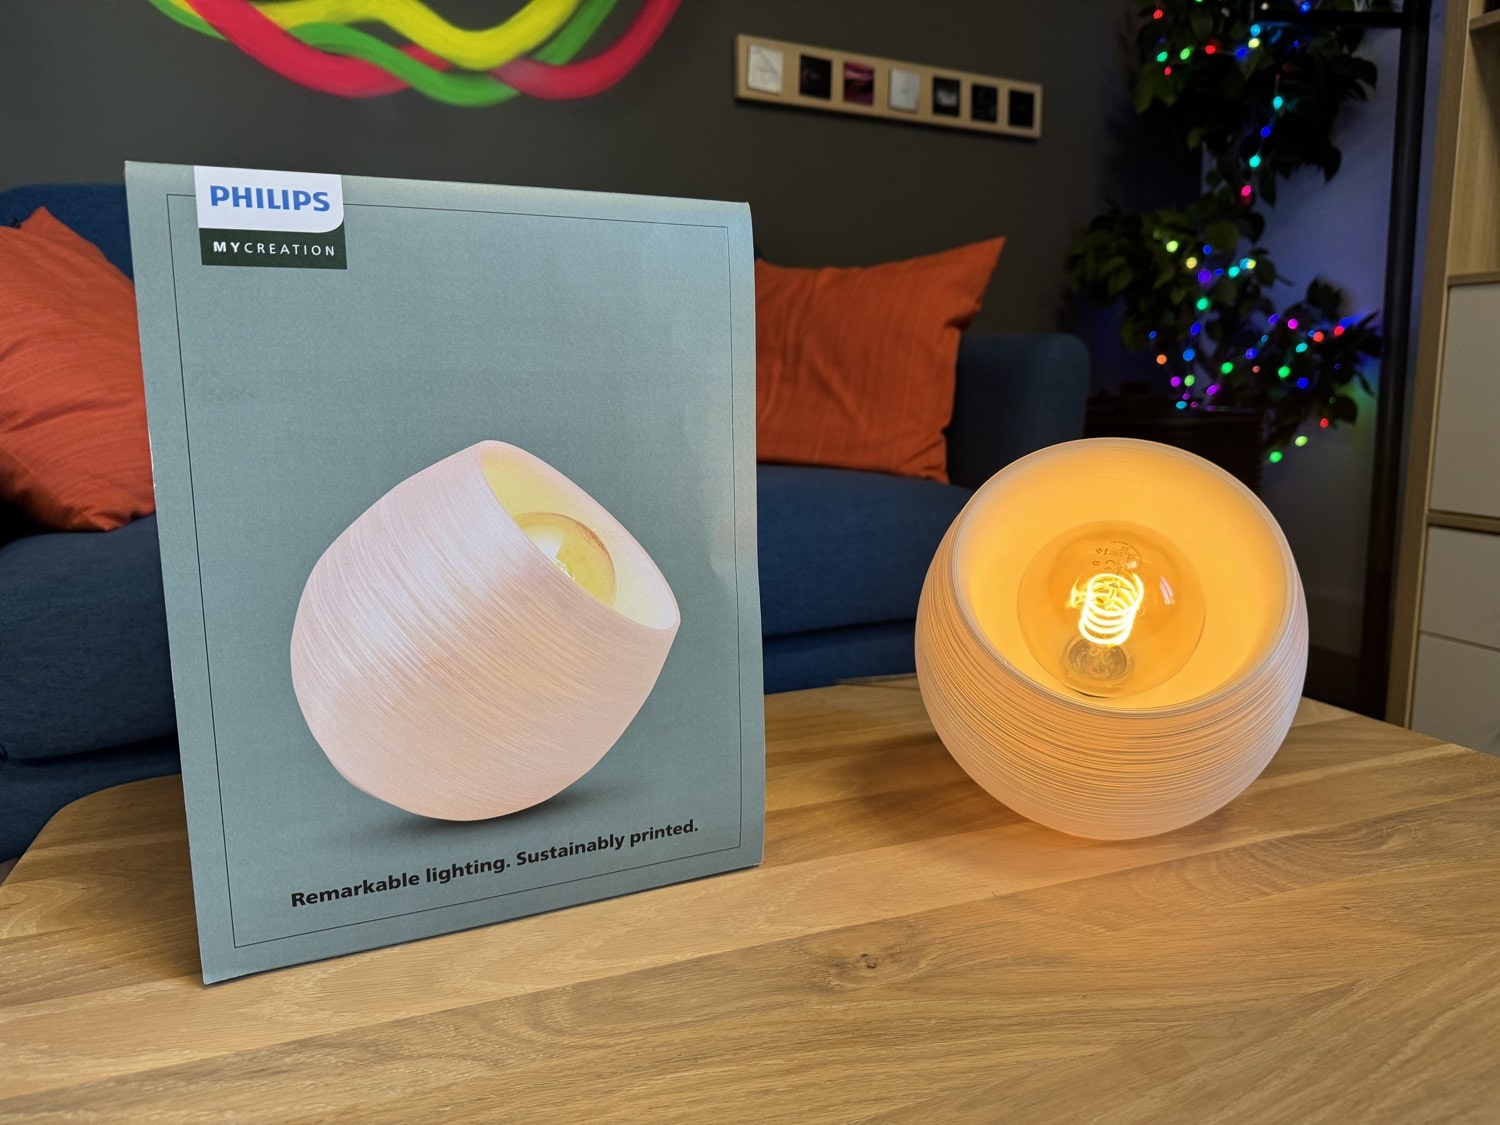 Hueblog: Philips MyCreation: Table lamp from the 3D printer